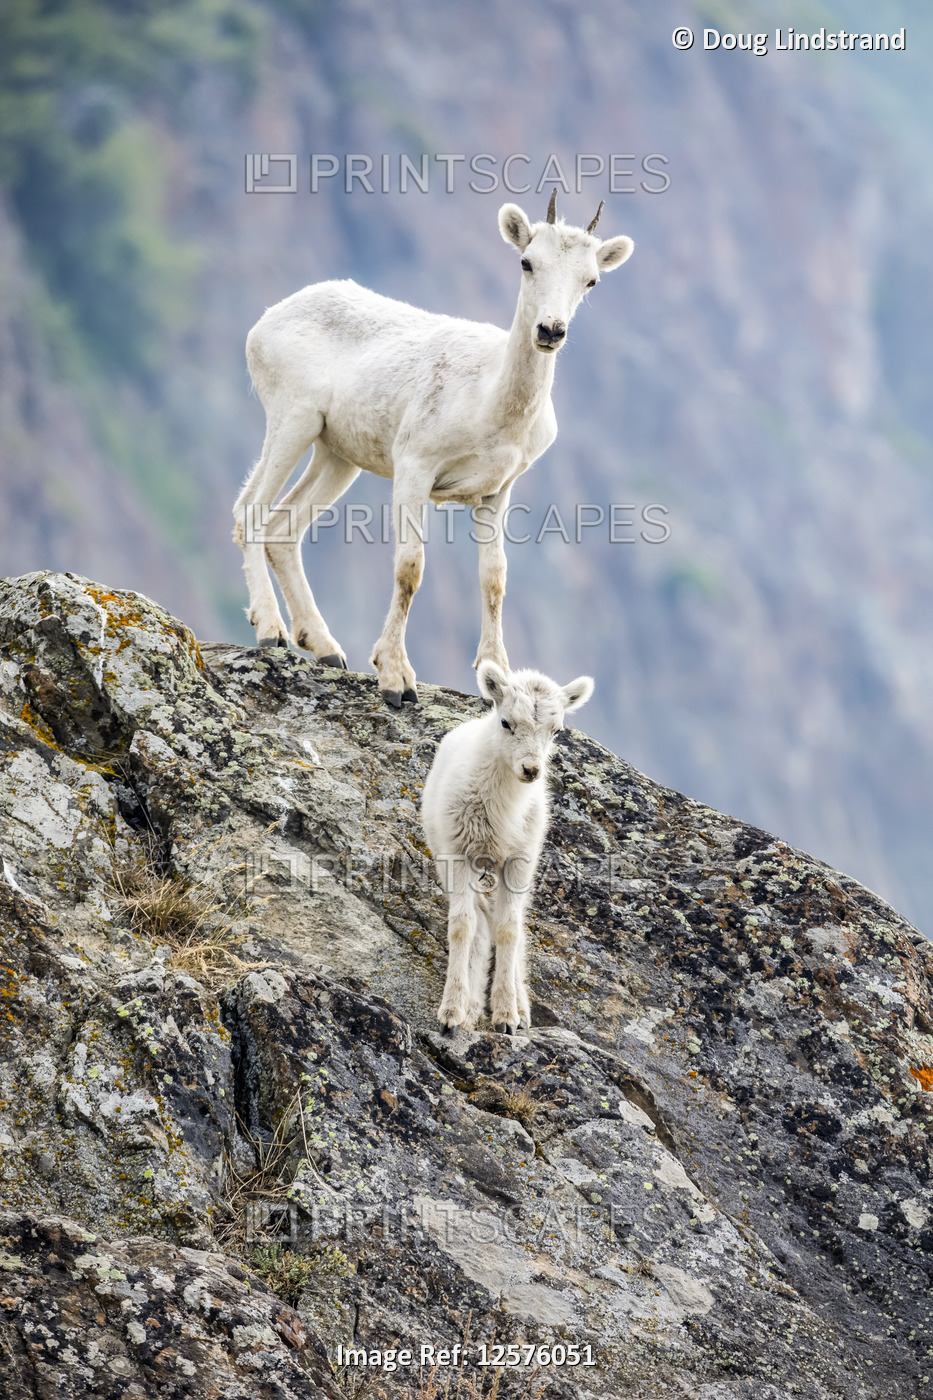 A lamb and an older Dall sheep (Ovis dalli) look at camera from their rocky ...